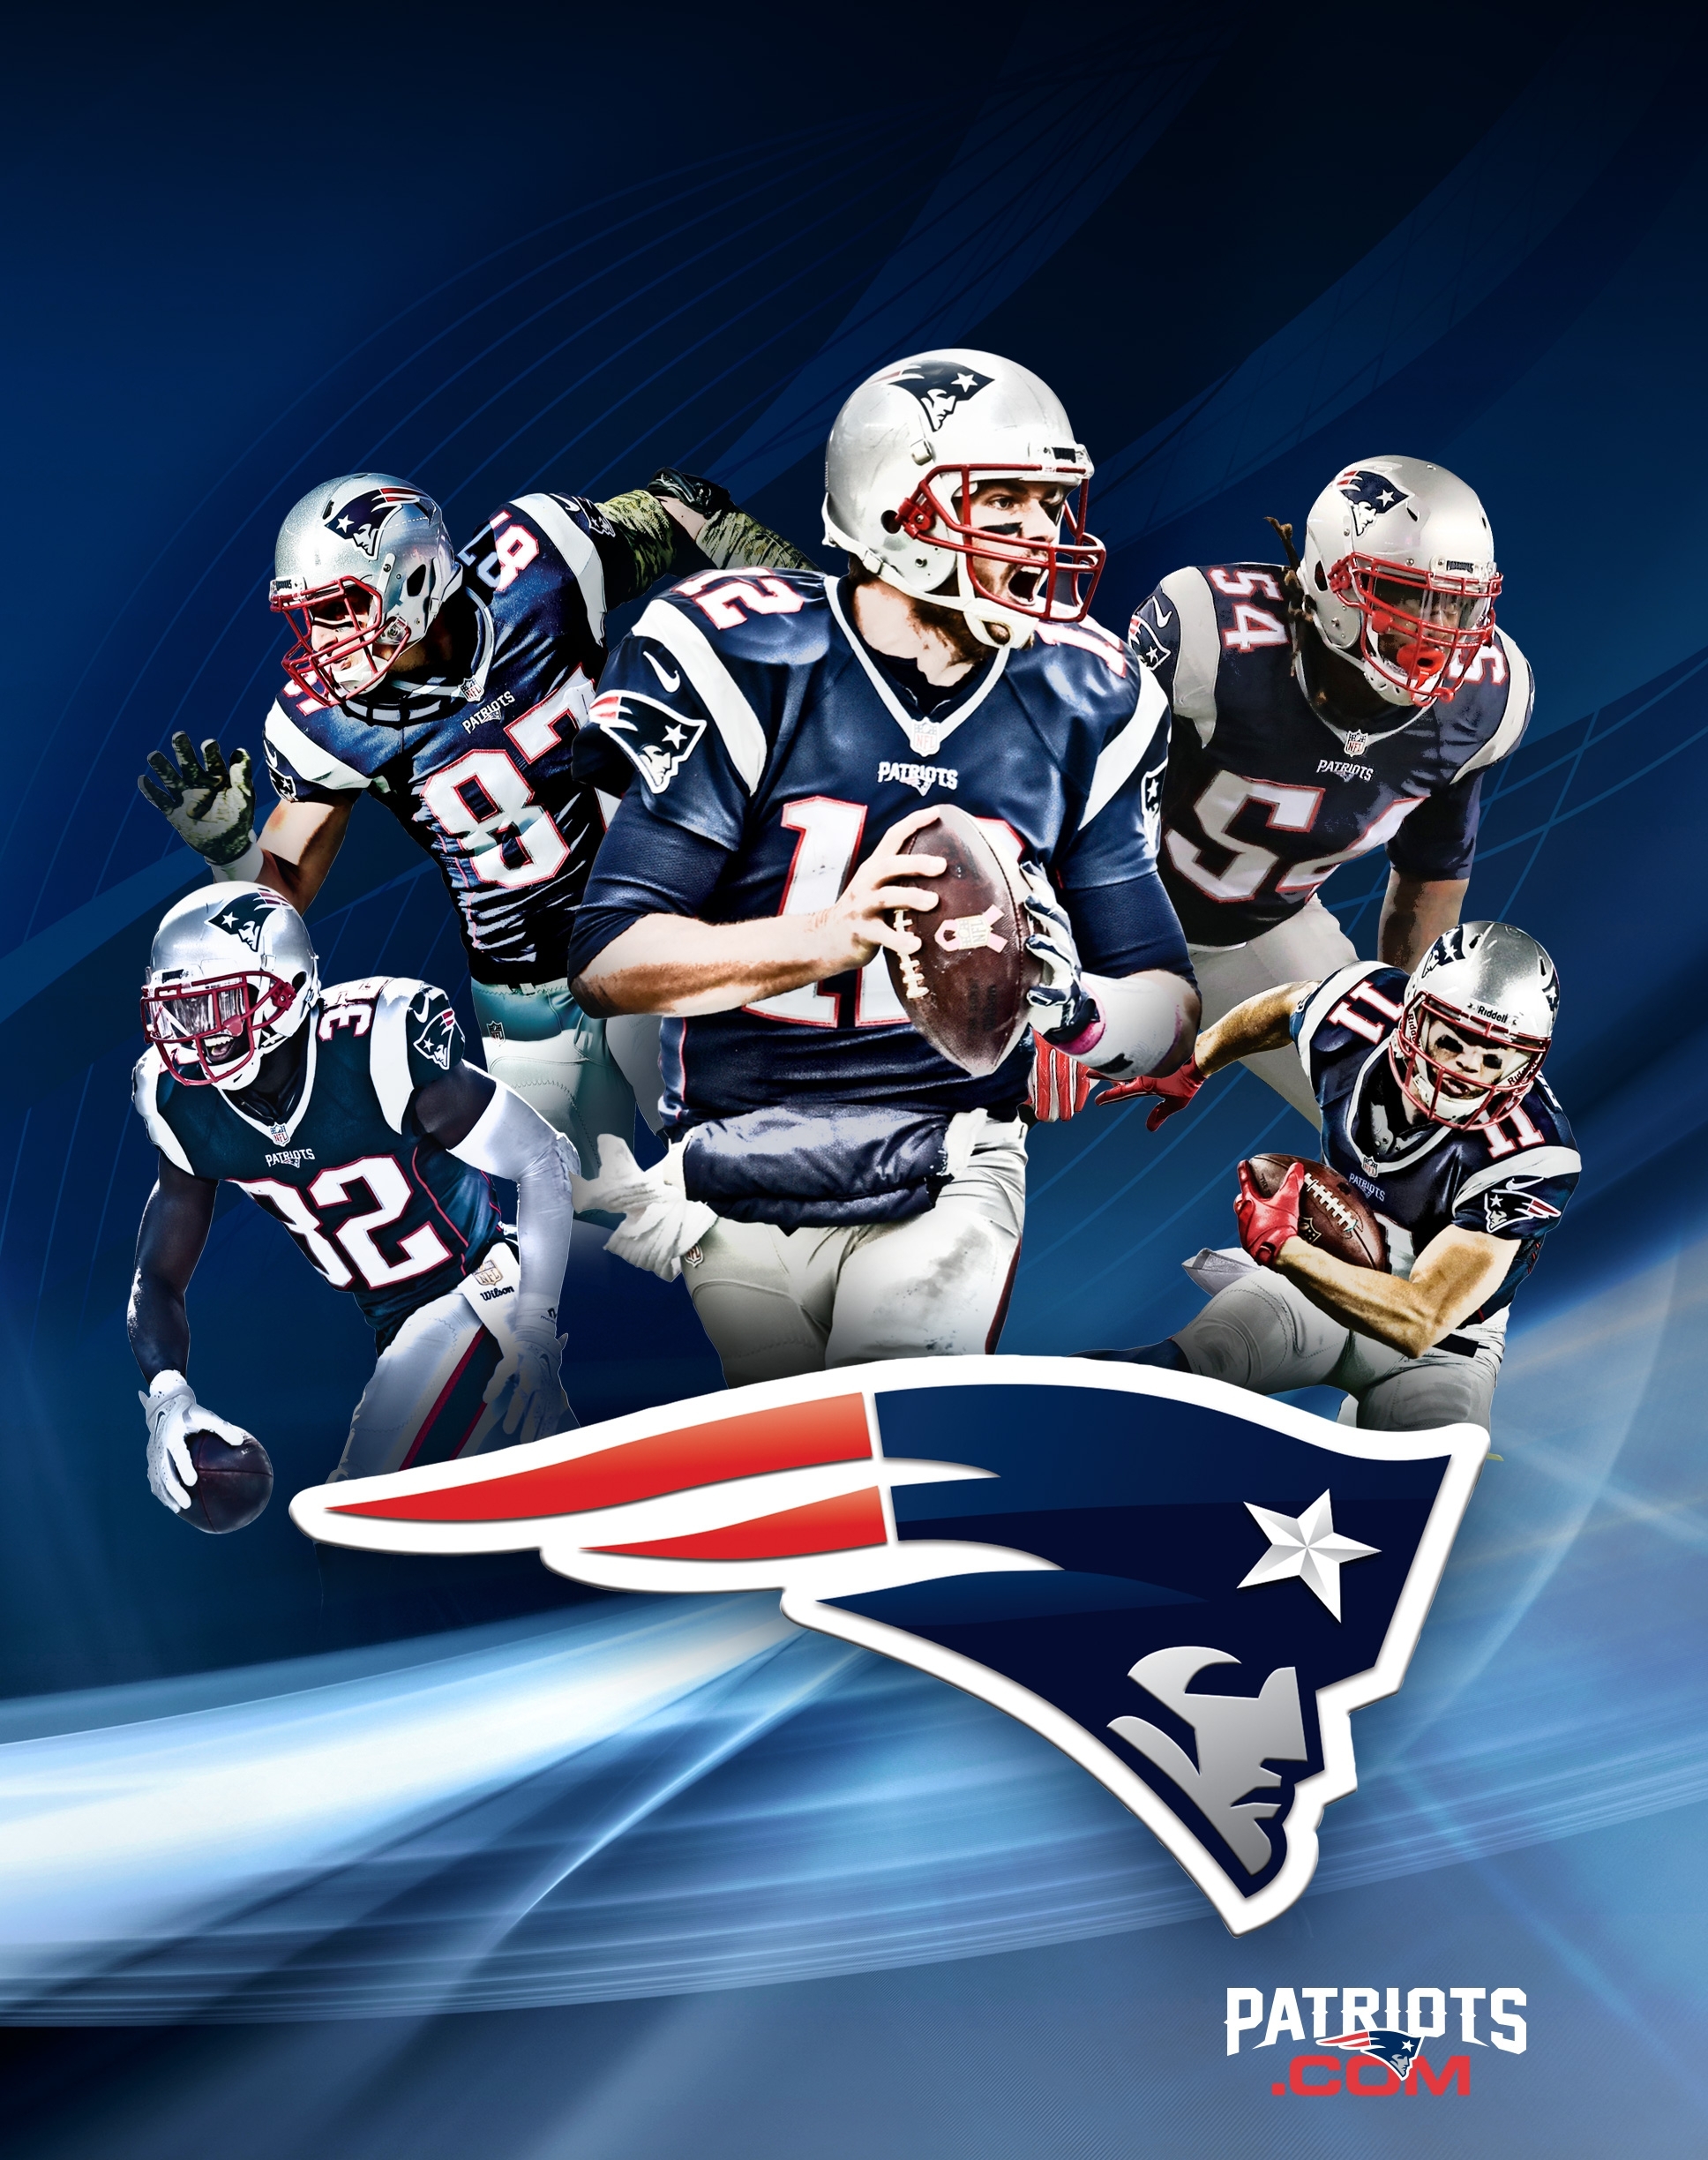 10 New Nfl New England Patriots Wallpapers FULL HD 1920×1080 For PC Desktop